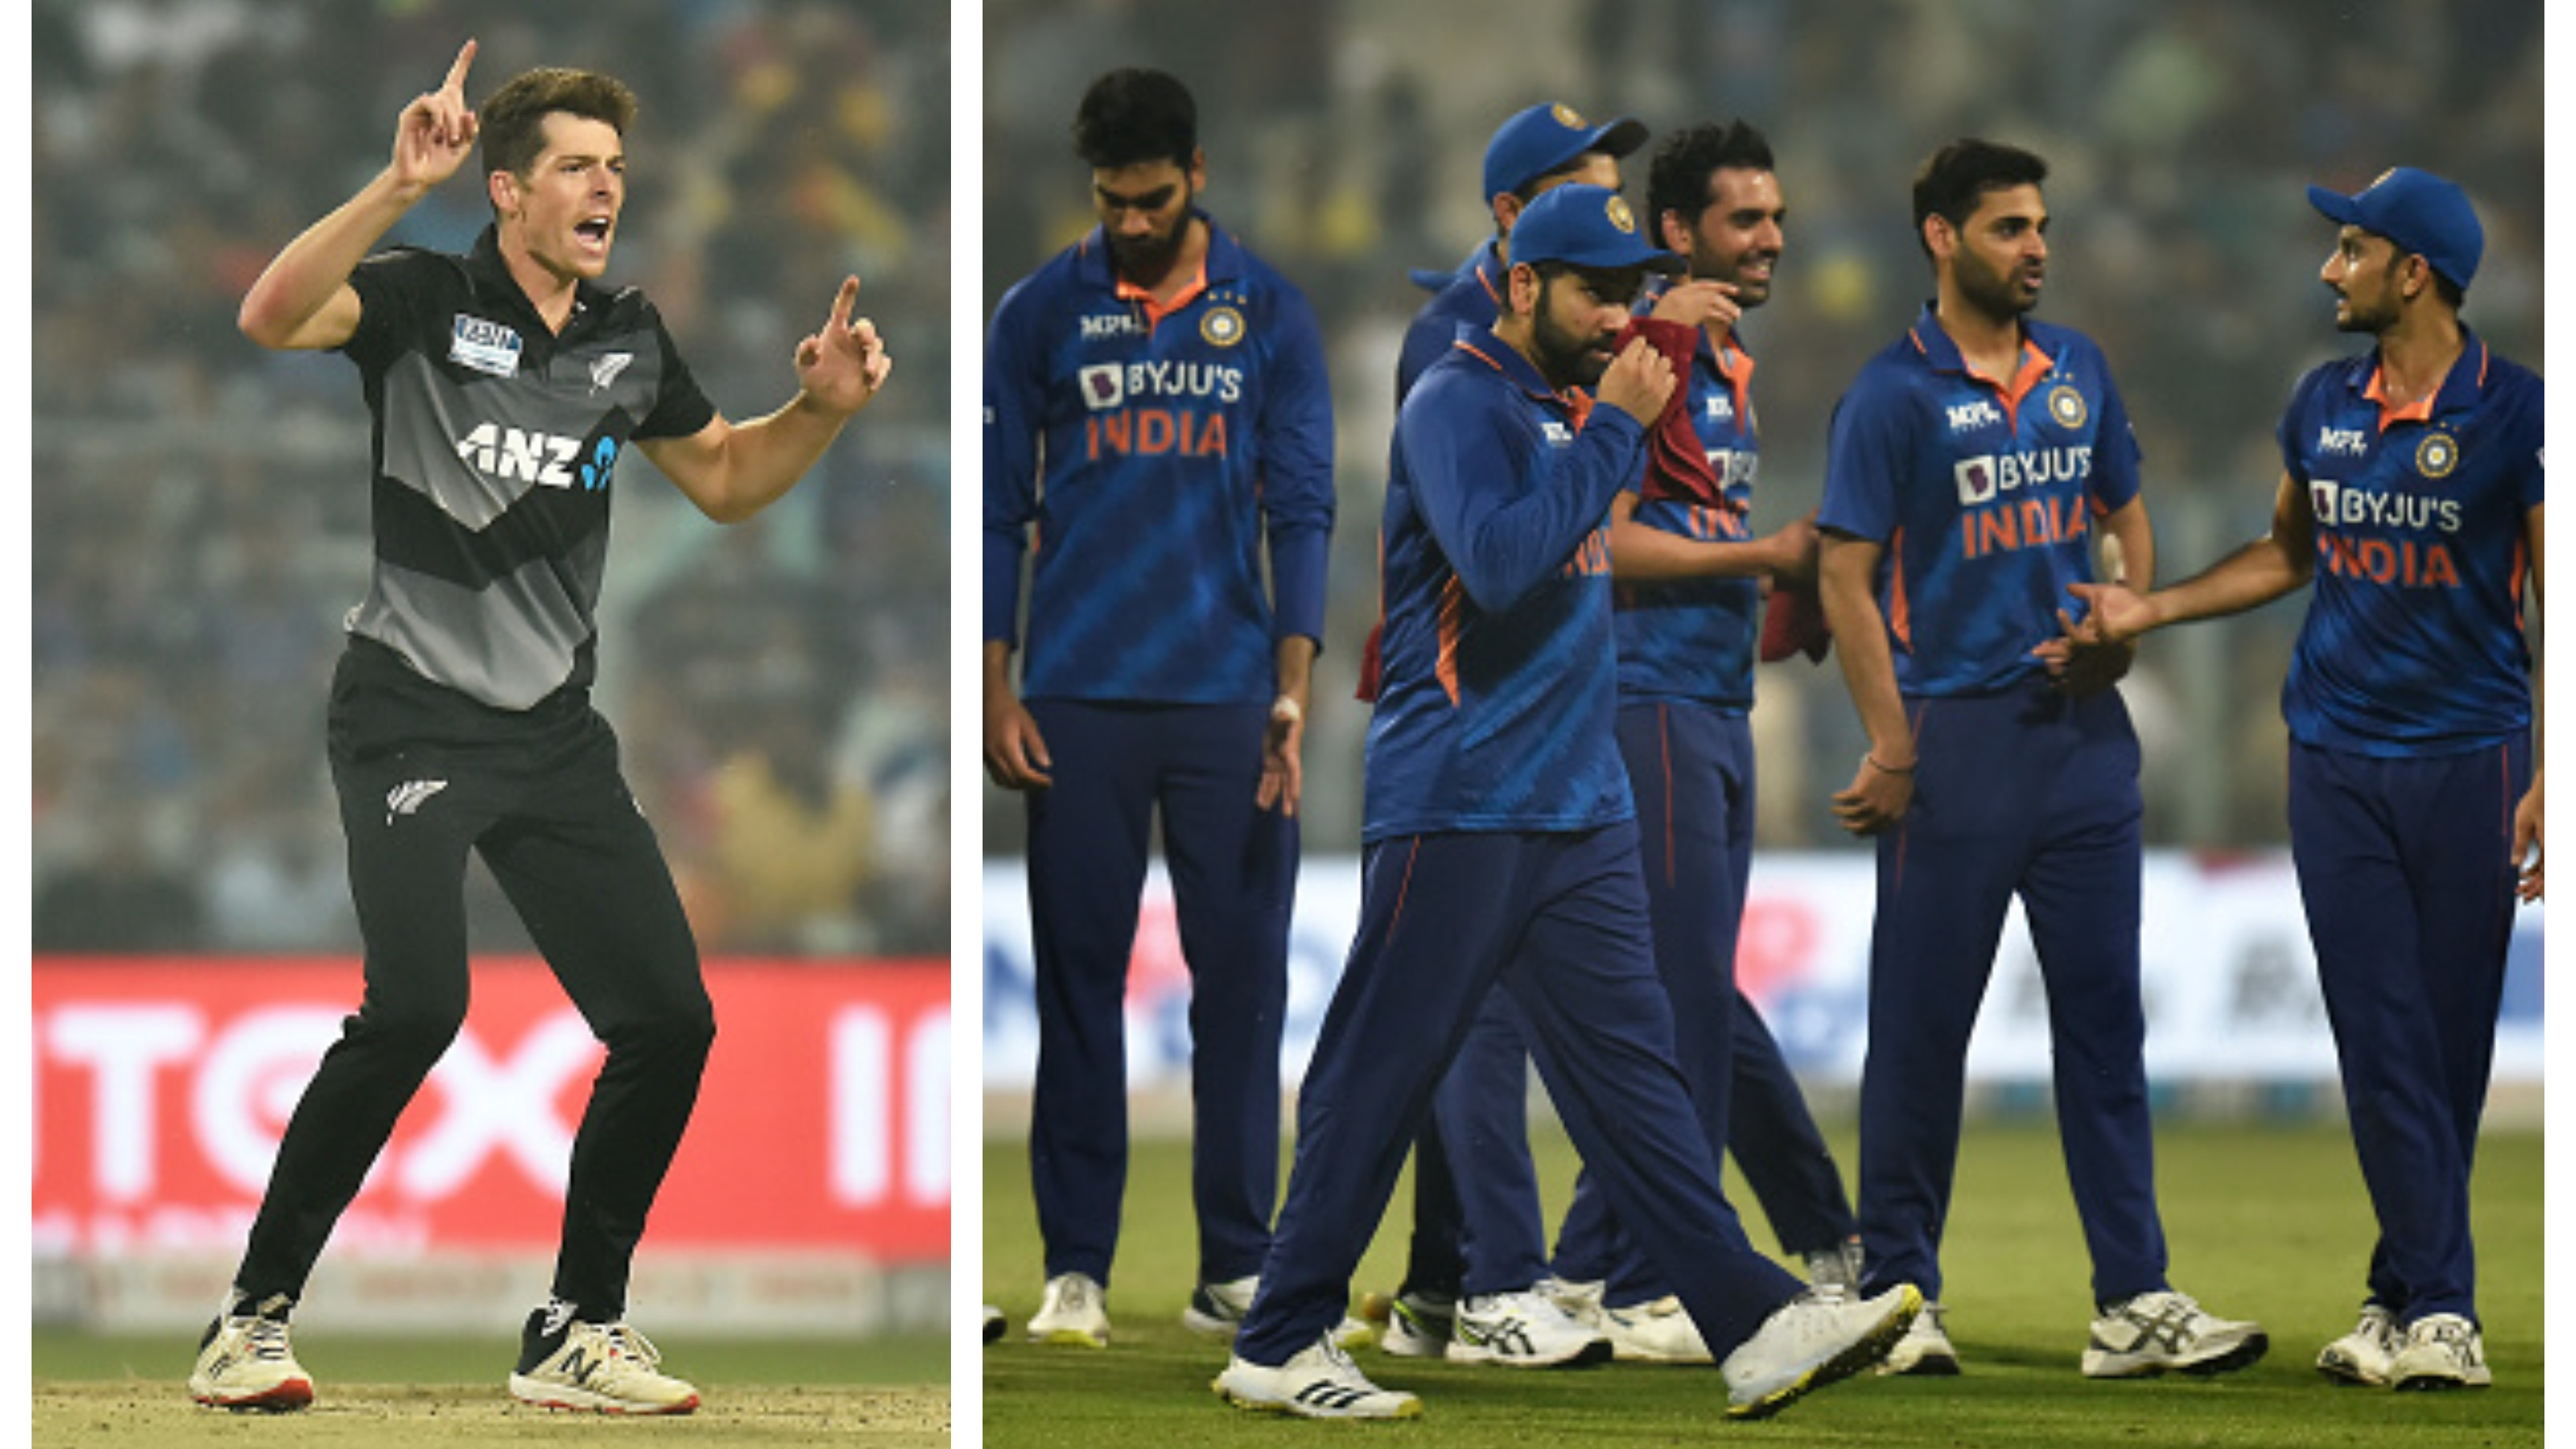 IND v NZ 2021: Mitchell Santner praises India’s performance in T20I series, looking forward to spin challenge in Tests